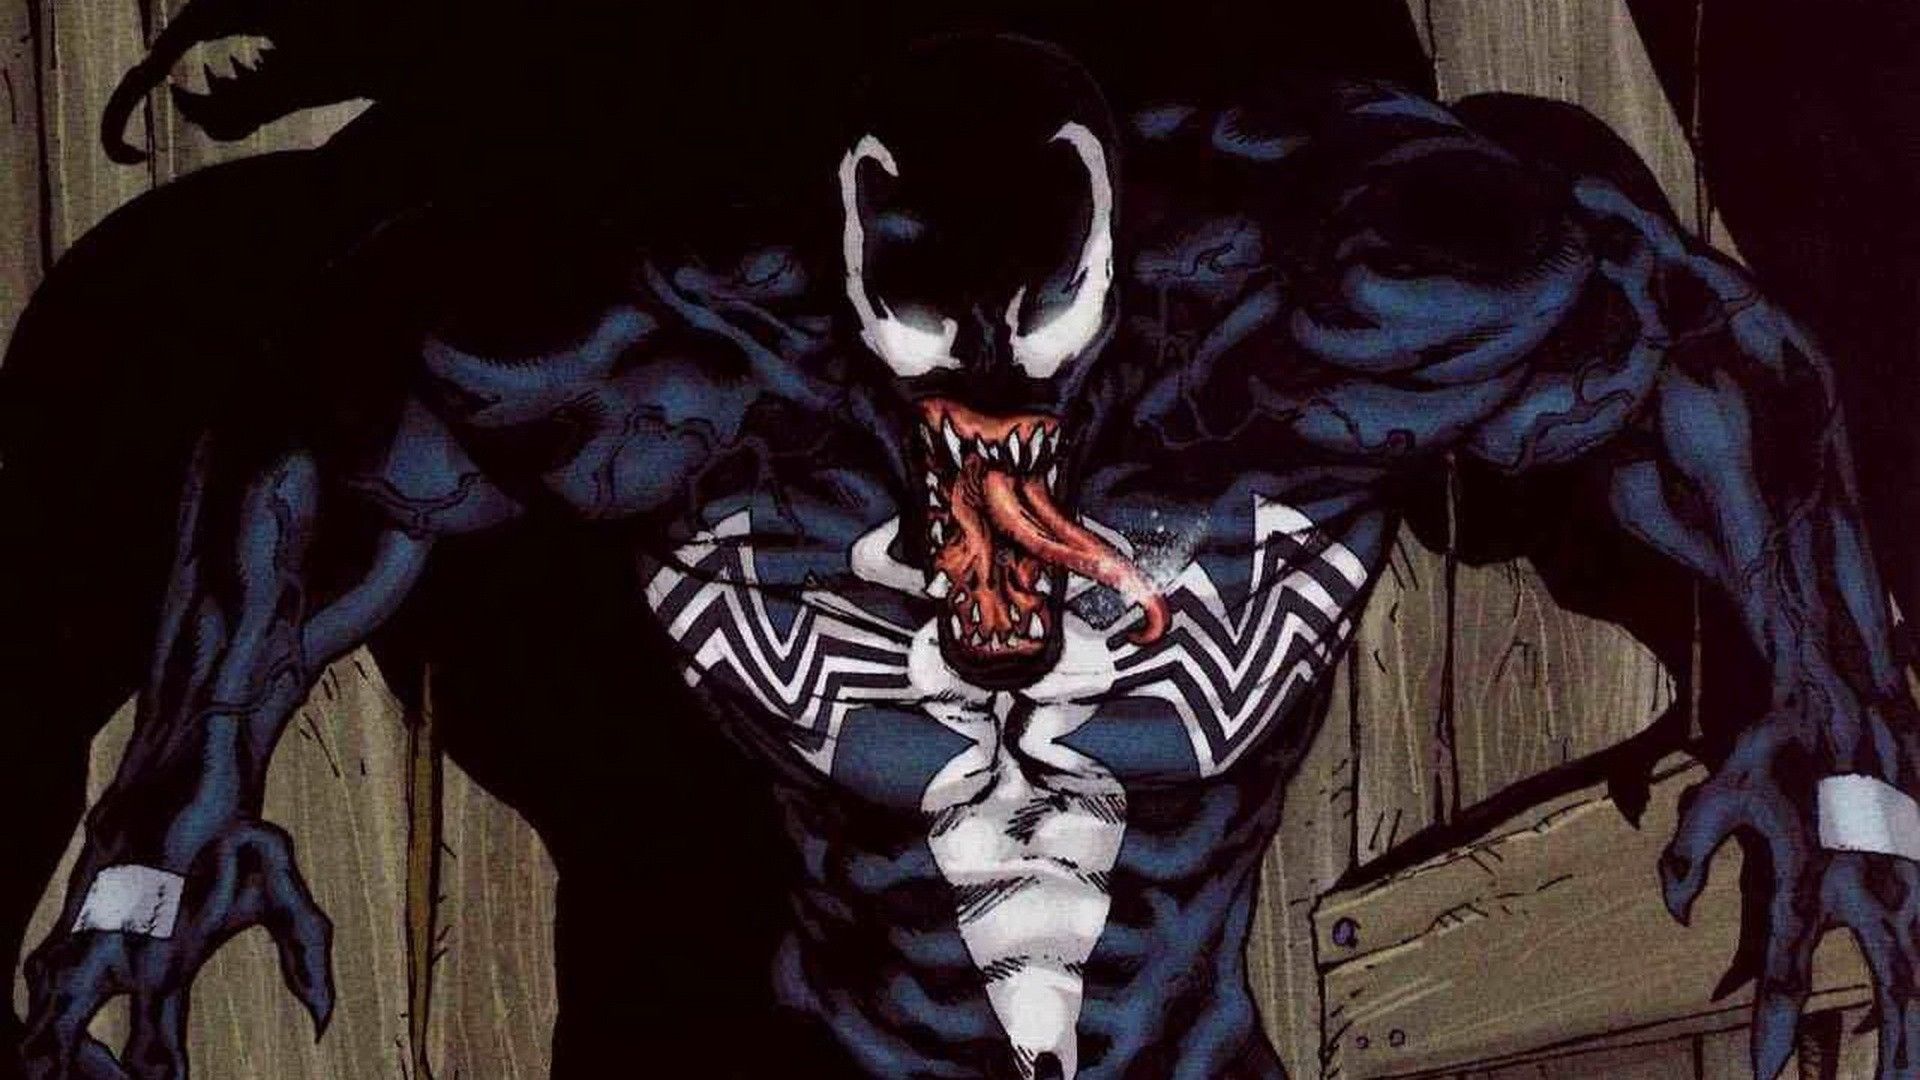 Marvel unveils Venom's new revamped look for Guardians of the Galaxy